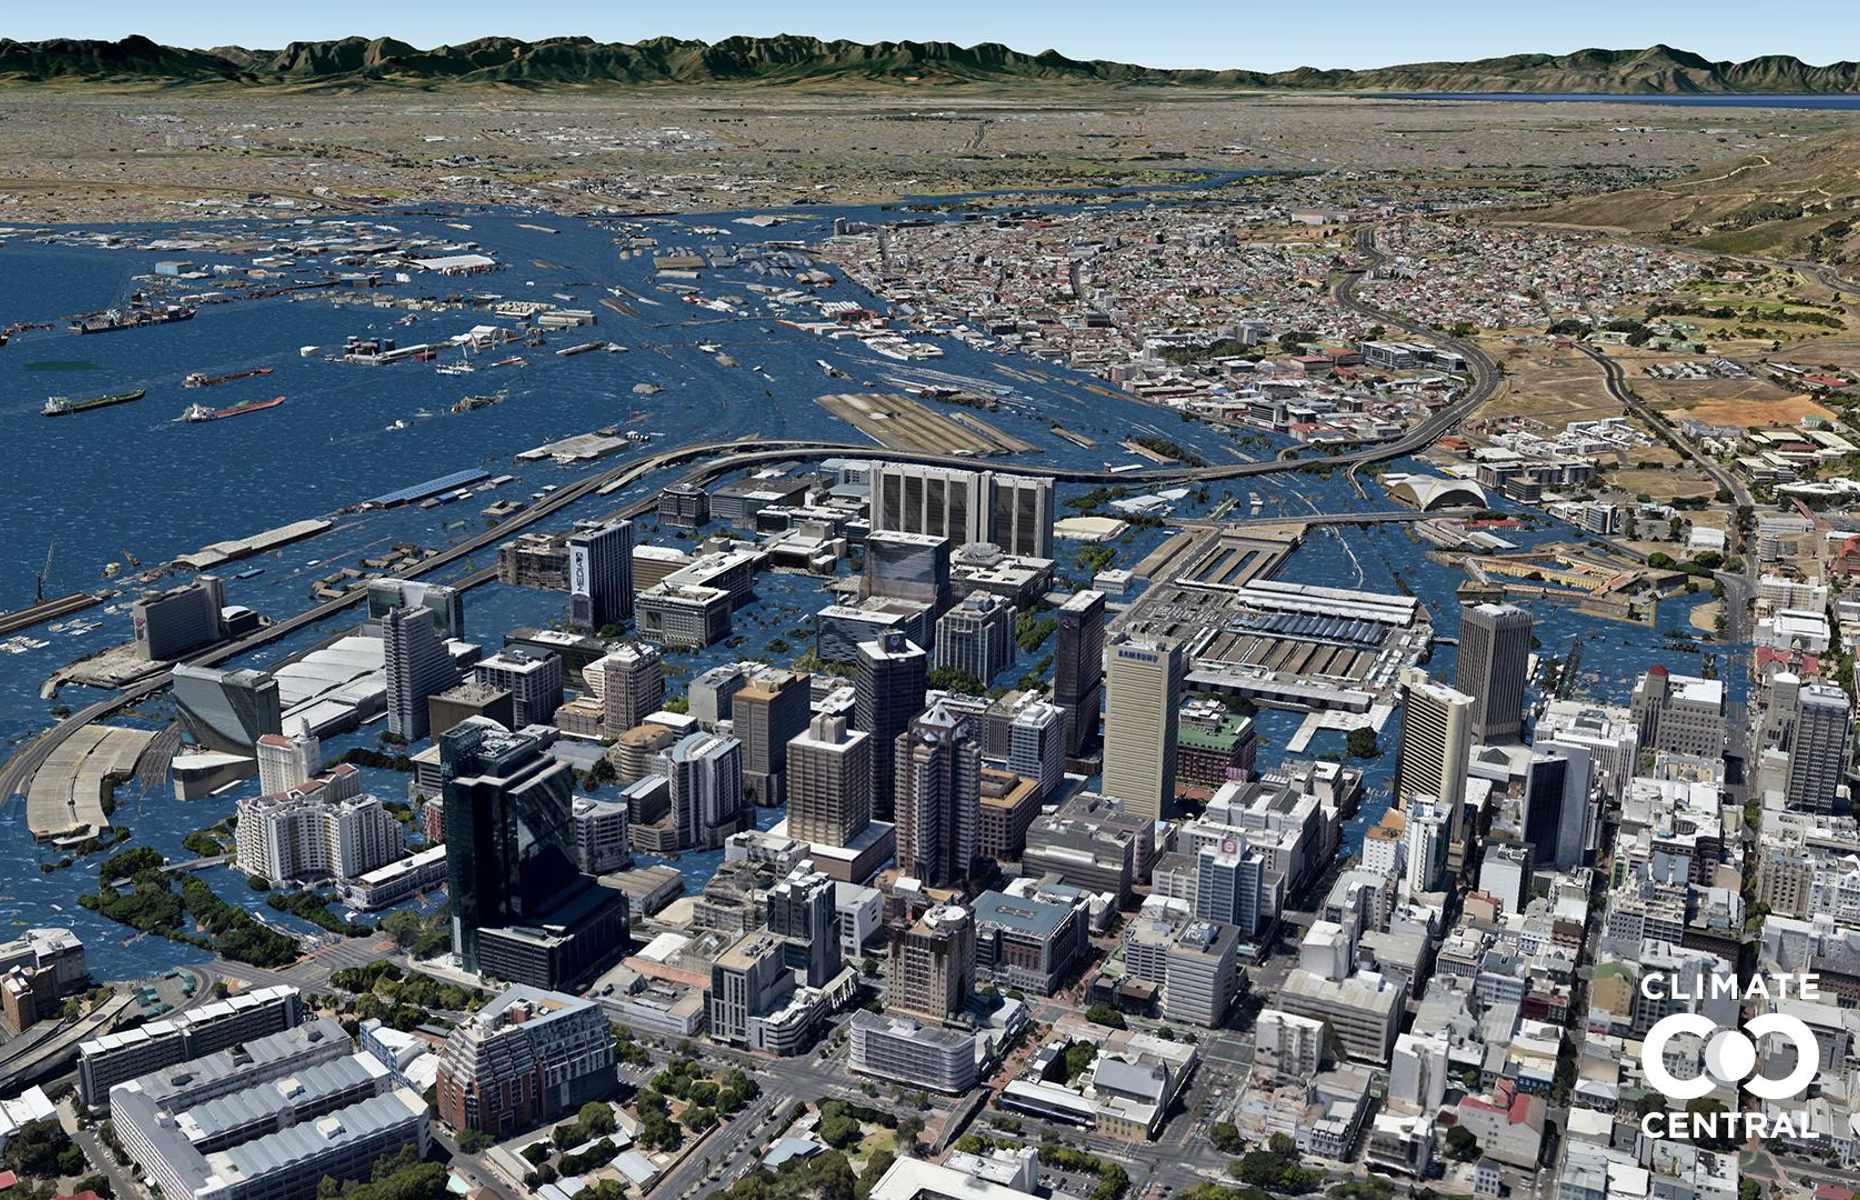 The coastal city of Cape Town will be all but completely flooded if climate change causes a 3°C (5.4°F) rise in temperature, with roads, train tracks and the lower storeys of buildings all set to be inundated with water.